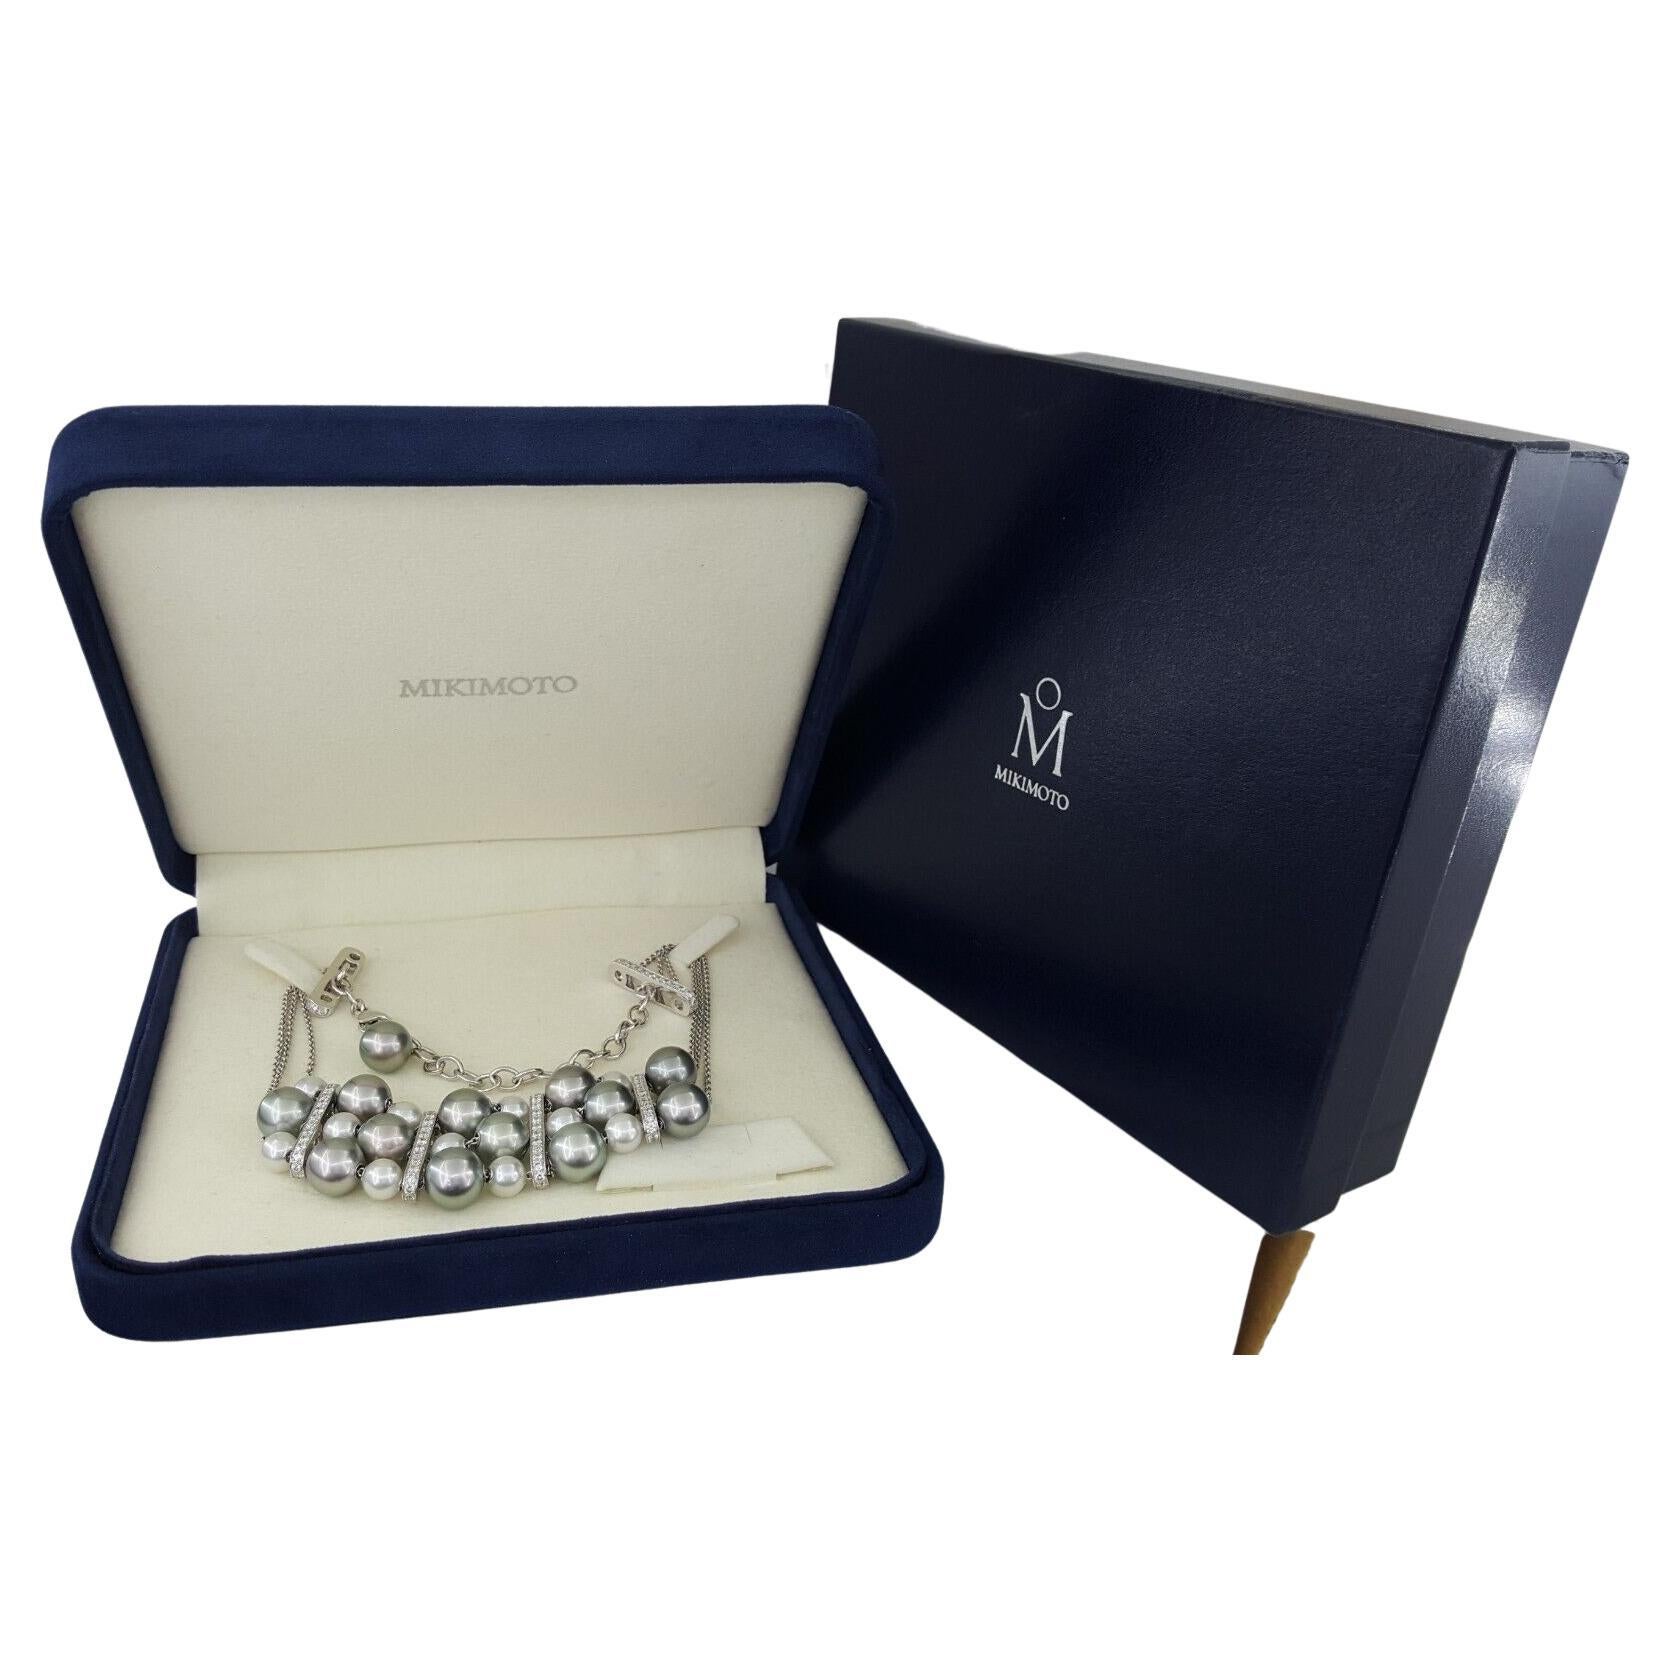 Mikimoto 18K White Gold 7.3-11.1 mm Grayish Silver & Cream Pearl 3-Strand Diamond Choker Necklace.

The Necklace weighs 64.2 grams, the diamond bars are 25mm x 6mm, Adjustable 12-15